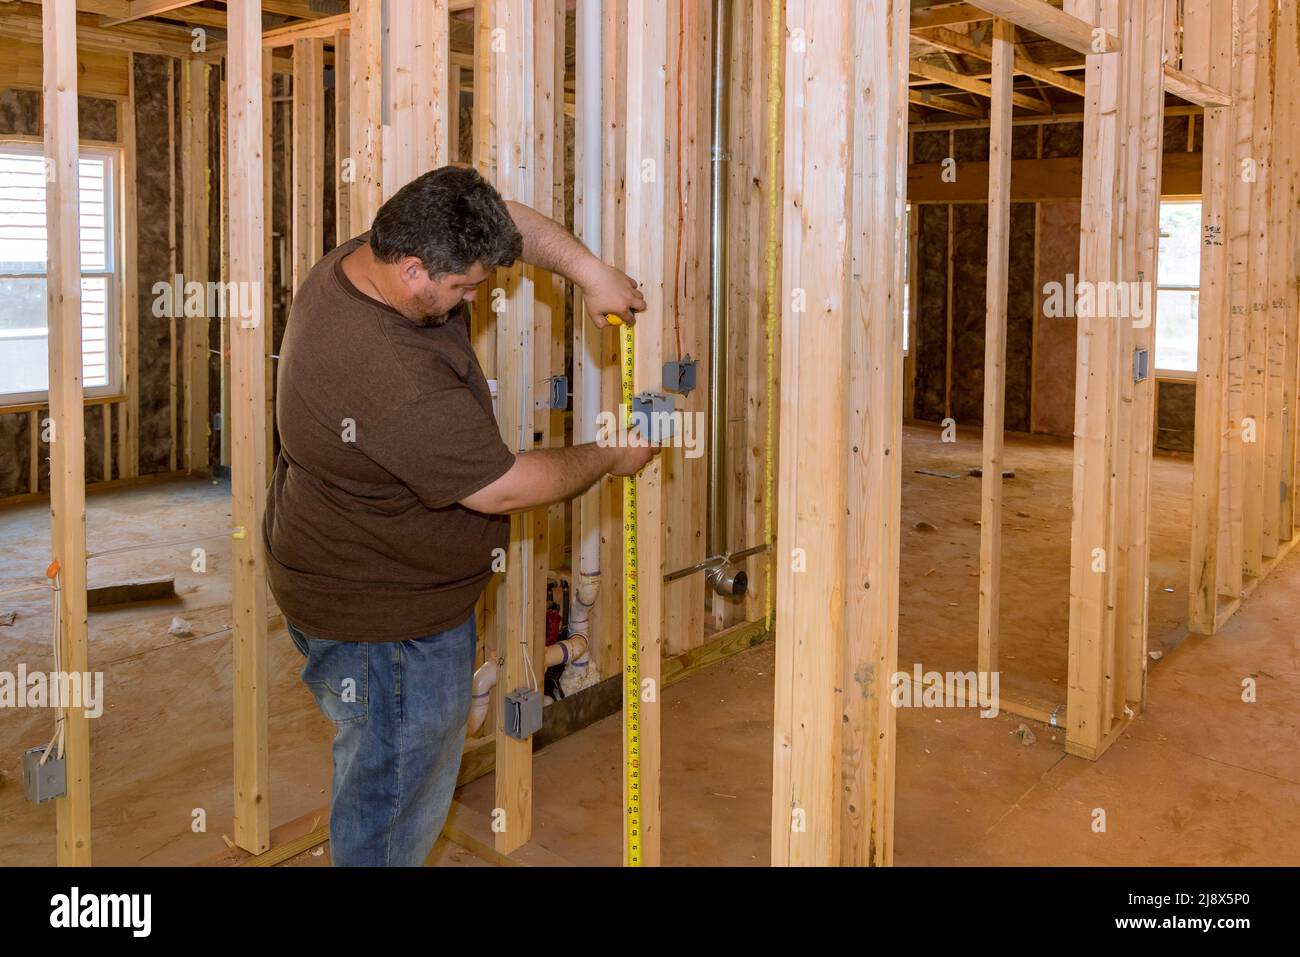 https://c8.alamy.com/comp/2J8X5P0/hands-of-electrician-installing-electrical-socket-in-new-apartment-2J8X5P0.jpg